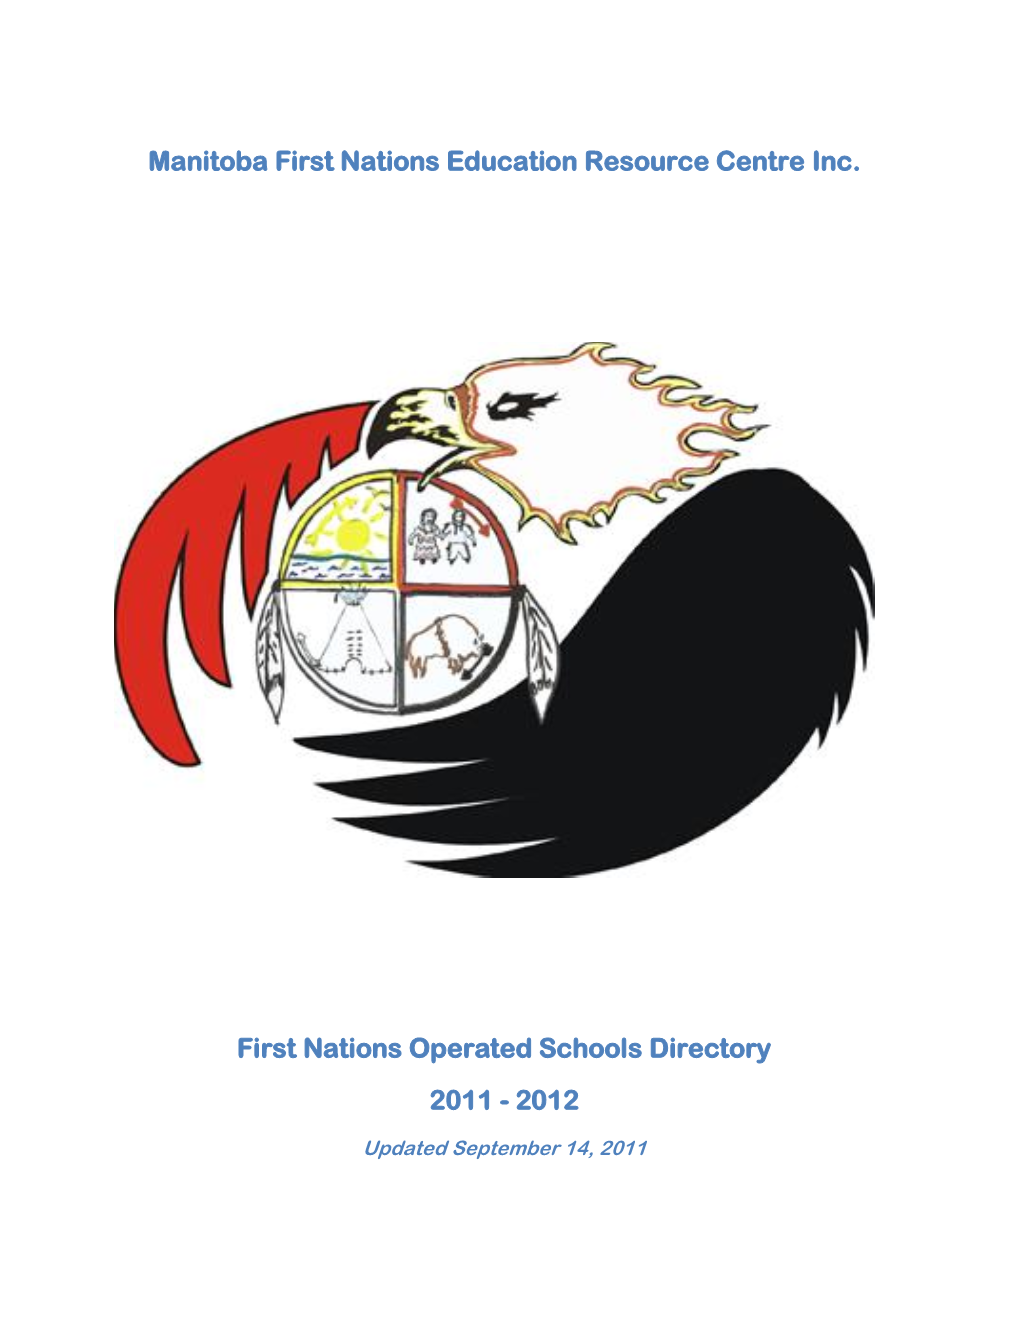 Manitoba First Nations Education Resource Centre Inc. First Nations